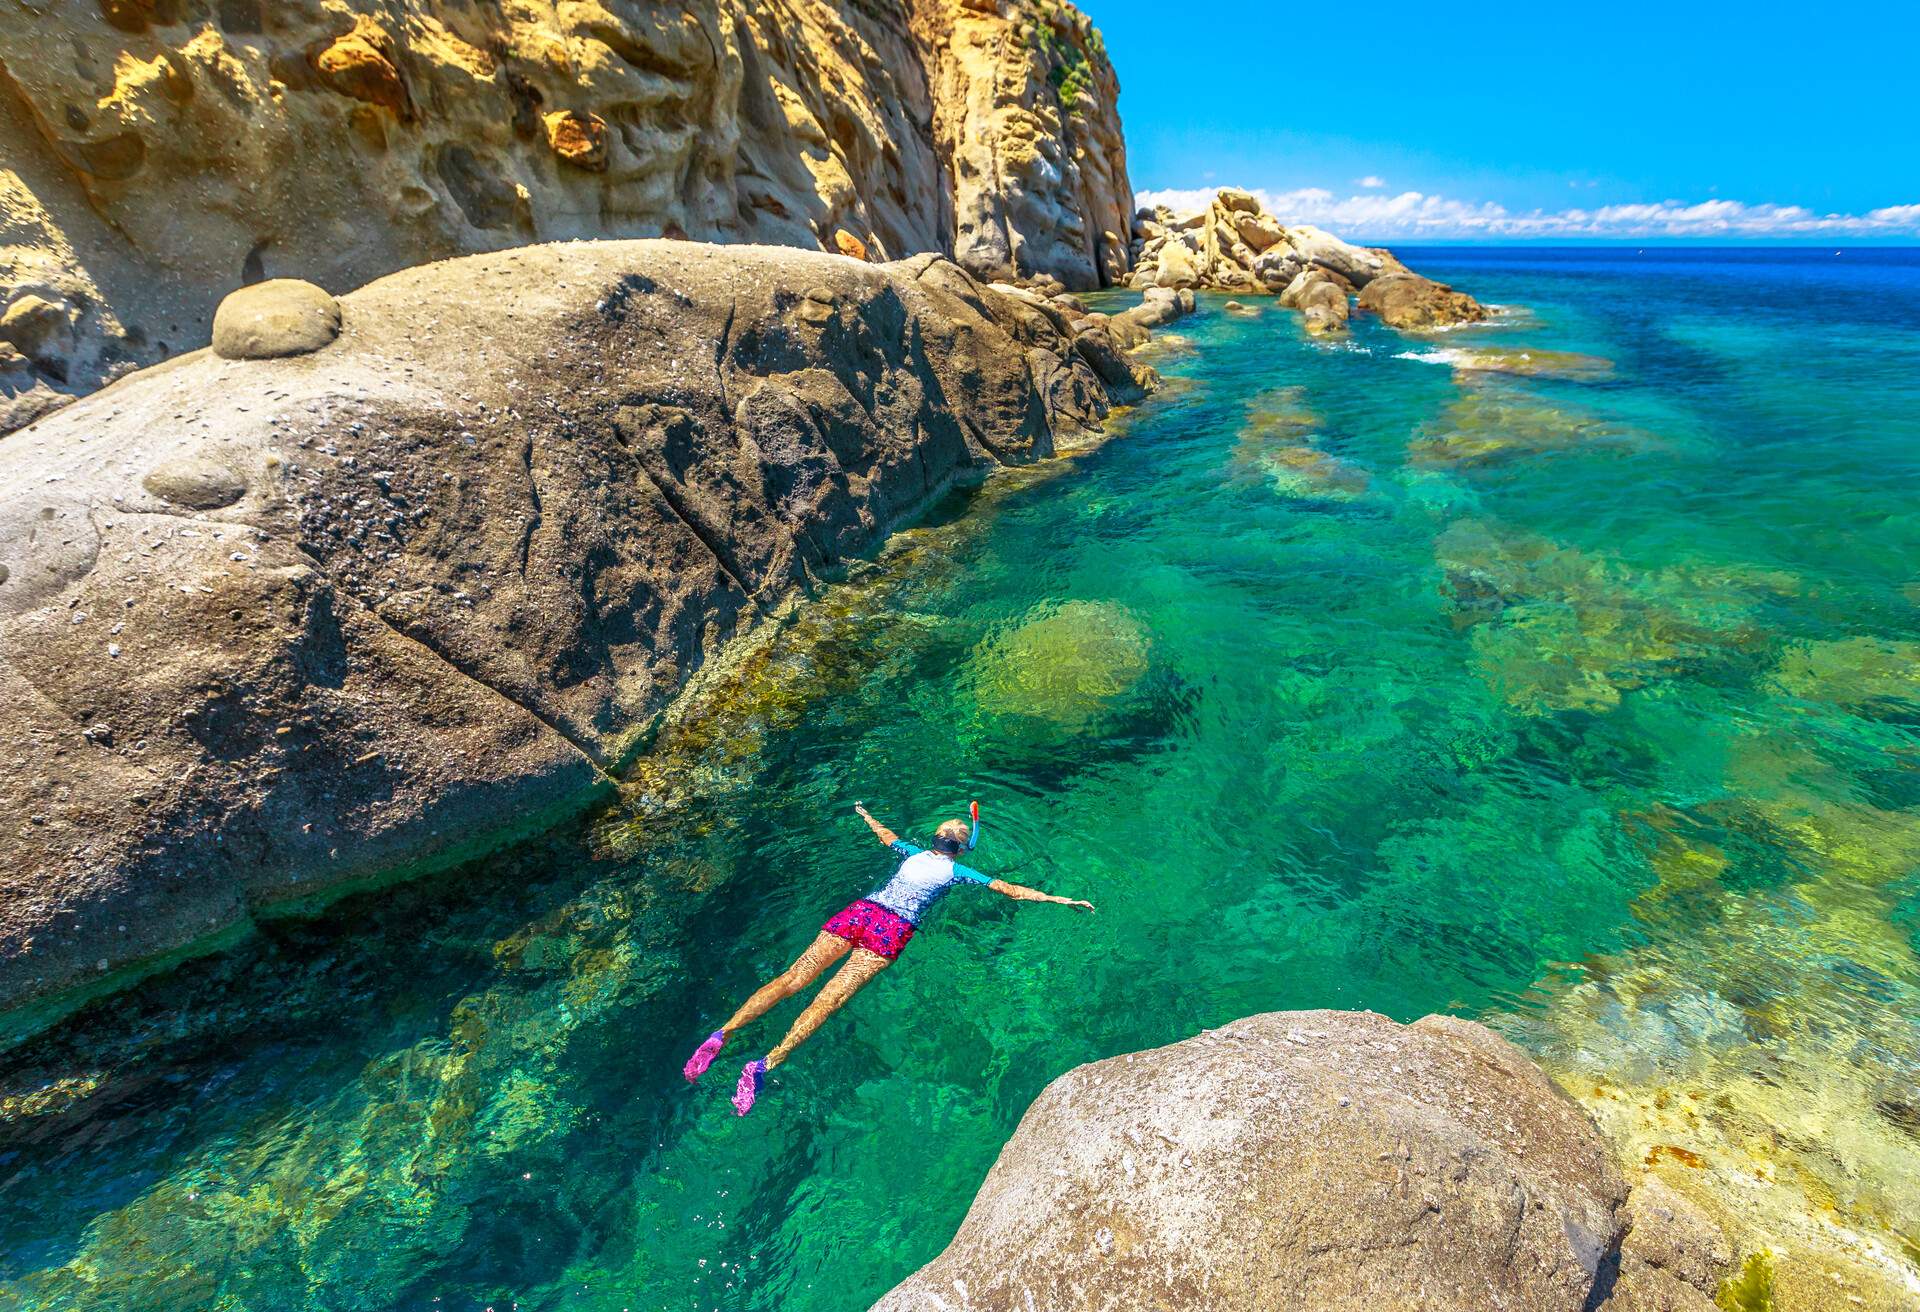 Top view of snorkeler in Sant 'Andrea beach with rocks and coves, Elba island, Italy